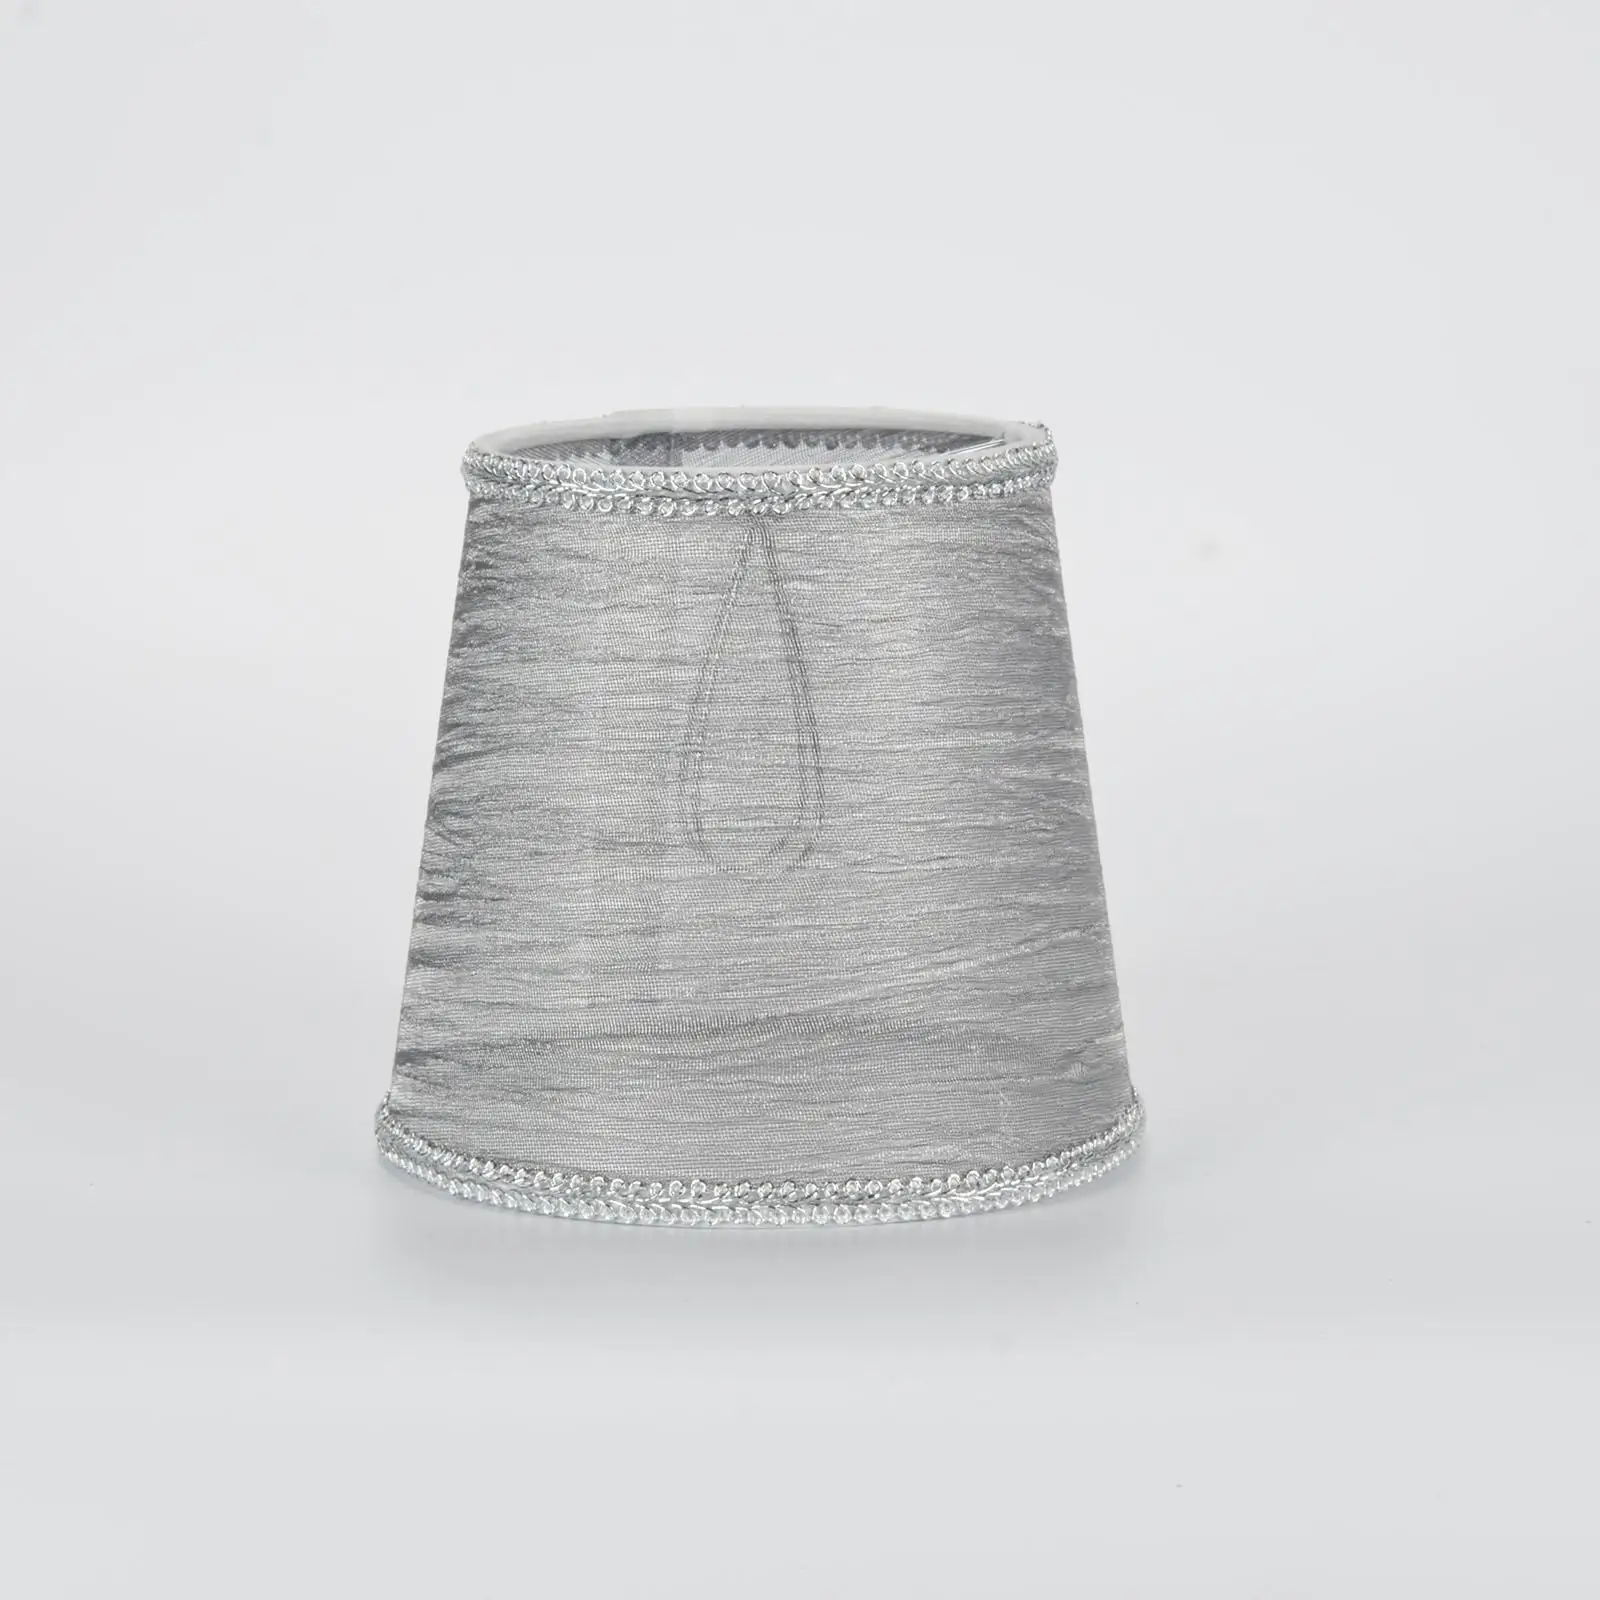 Modern Transparent Lamp Shade Cover Decorative Fabric Lampshade for Chandelier Pendant Wall Lamp Installation Parties